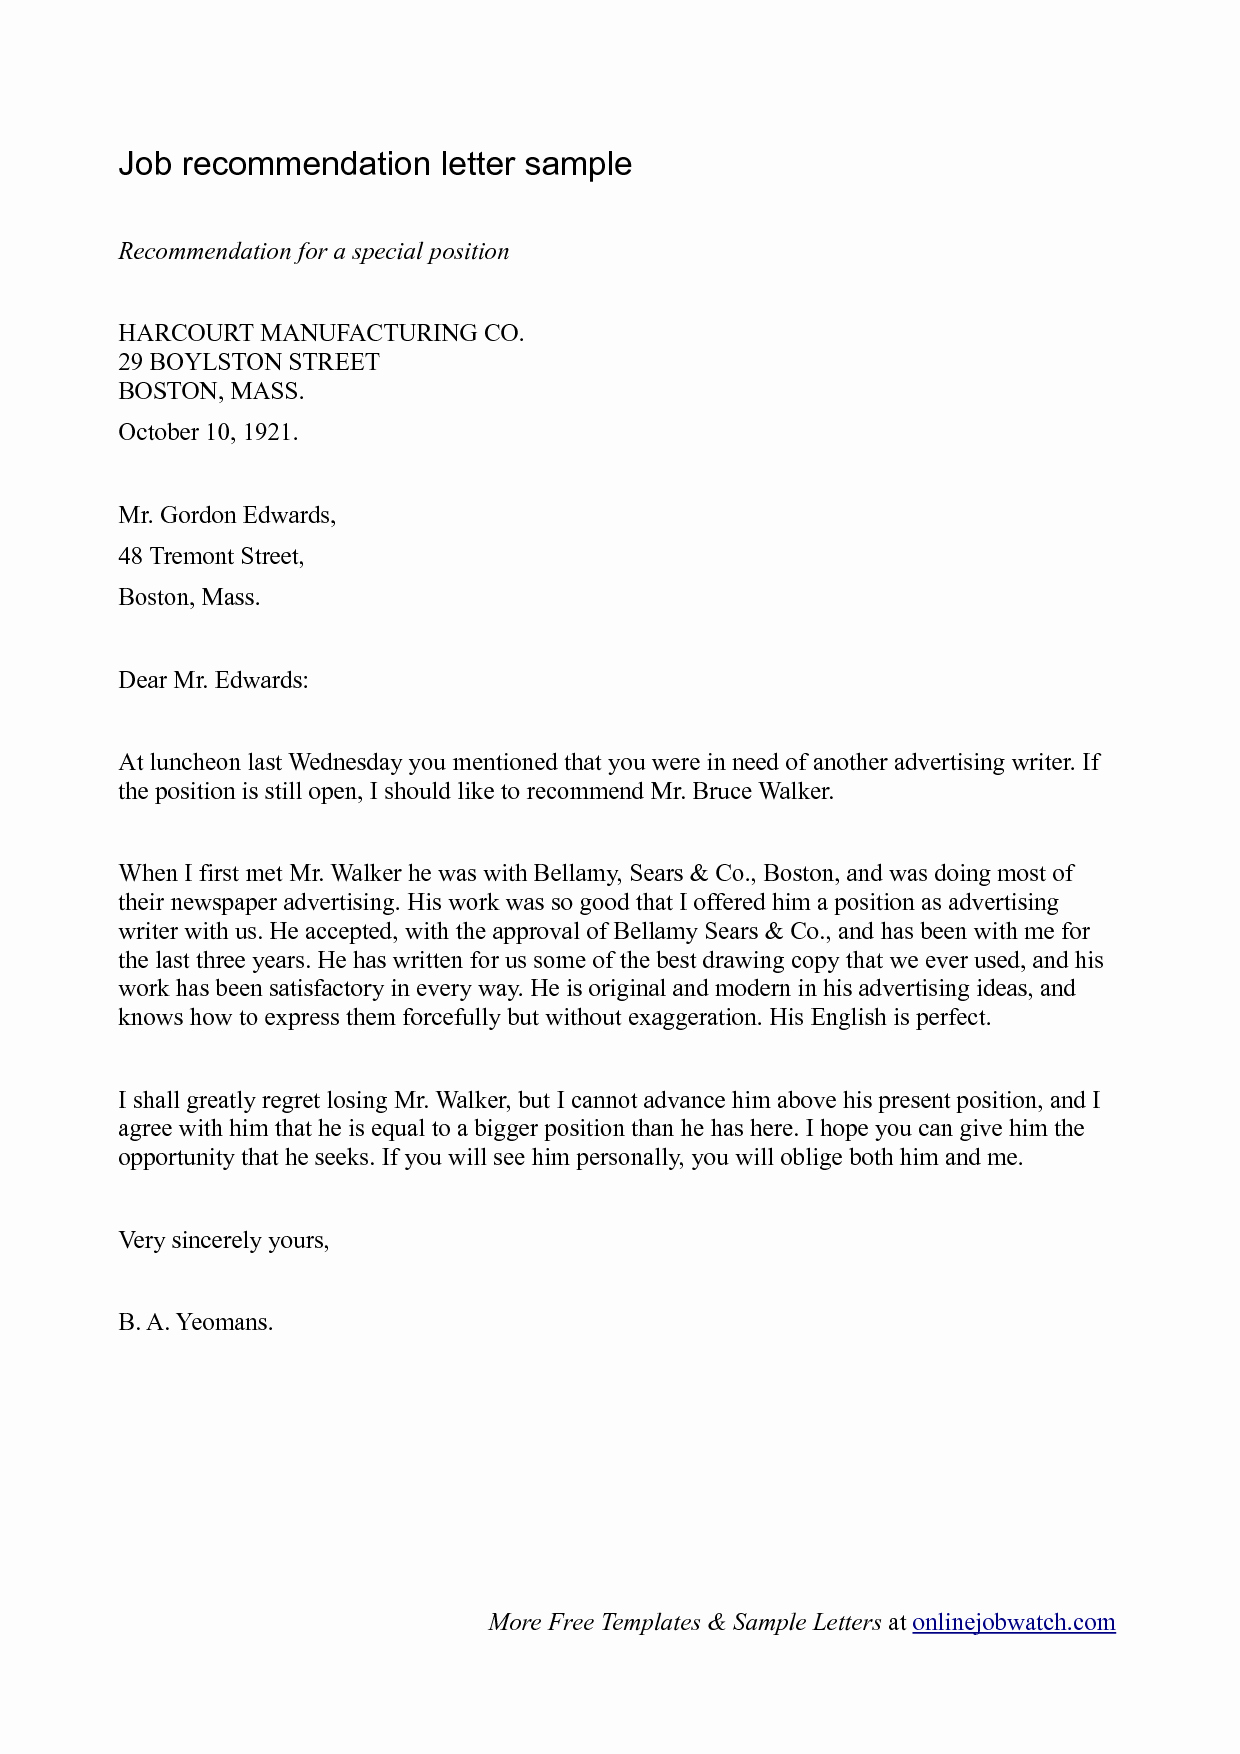 Sample Professional Reference Letter